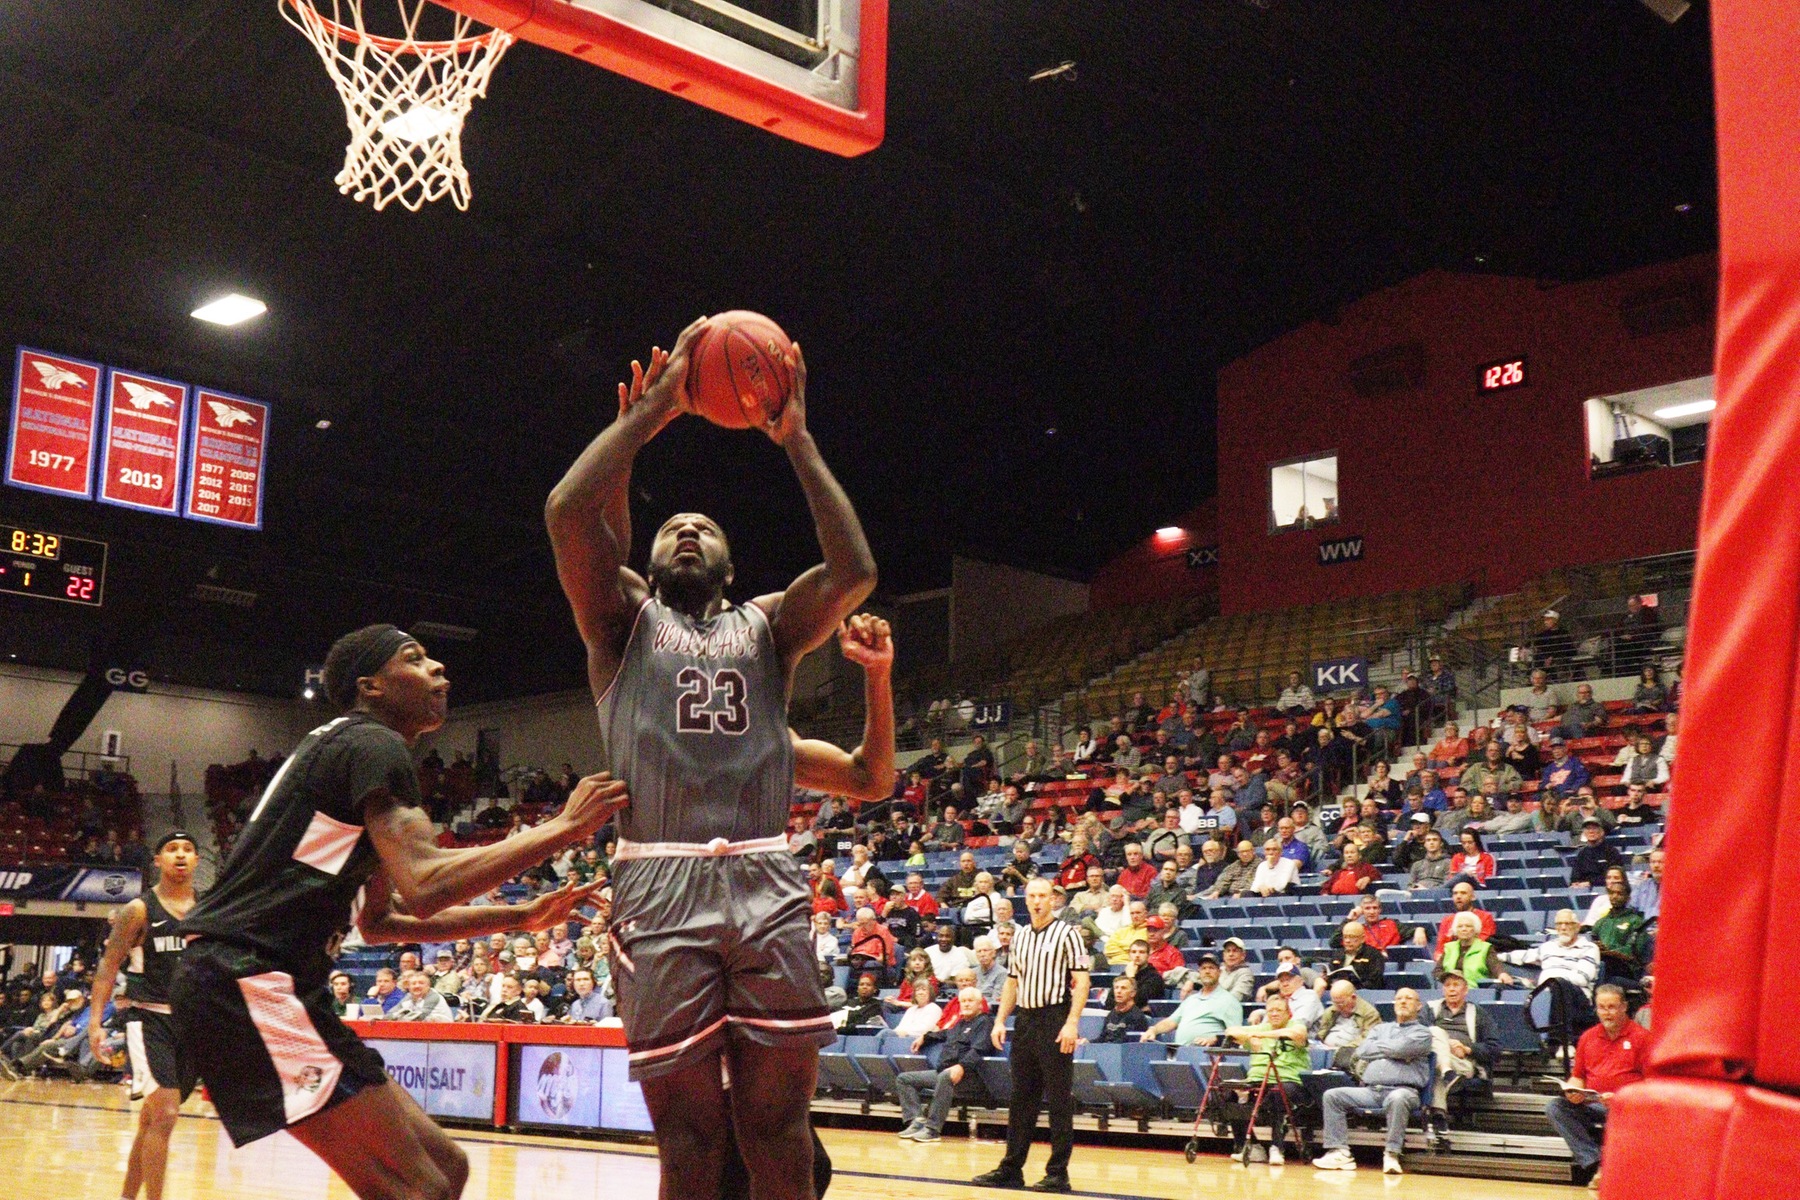 11-seed Pearl River weathers slow start to topple Williston State